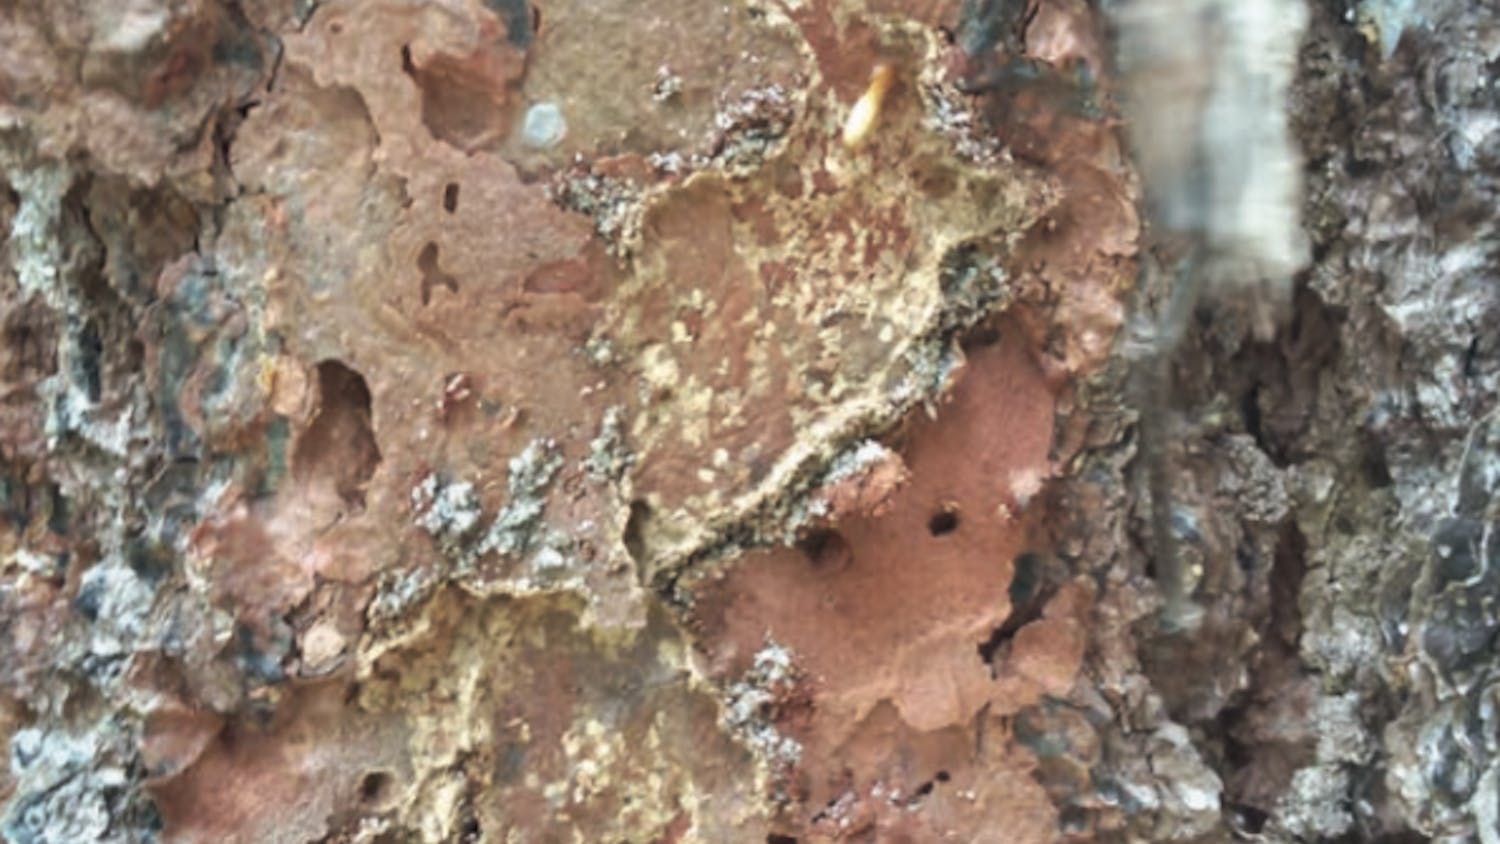 The researchers can see the destruction brought upon by the termites after scraping back the bark of a slash pine tree. The termites damage living tissue and eventually kill the tree.